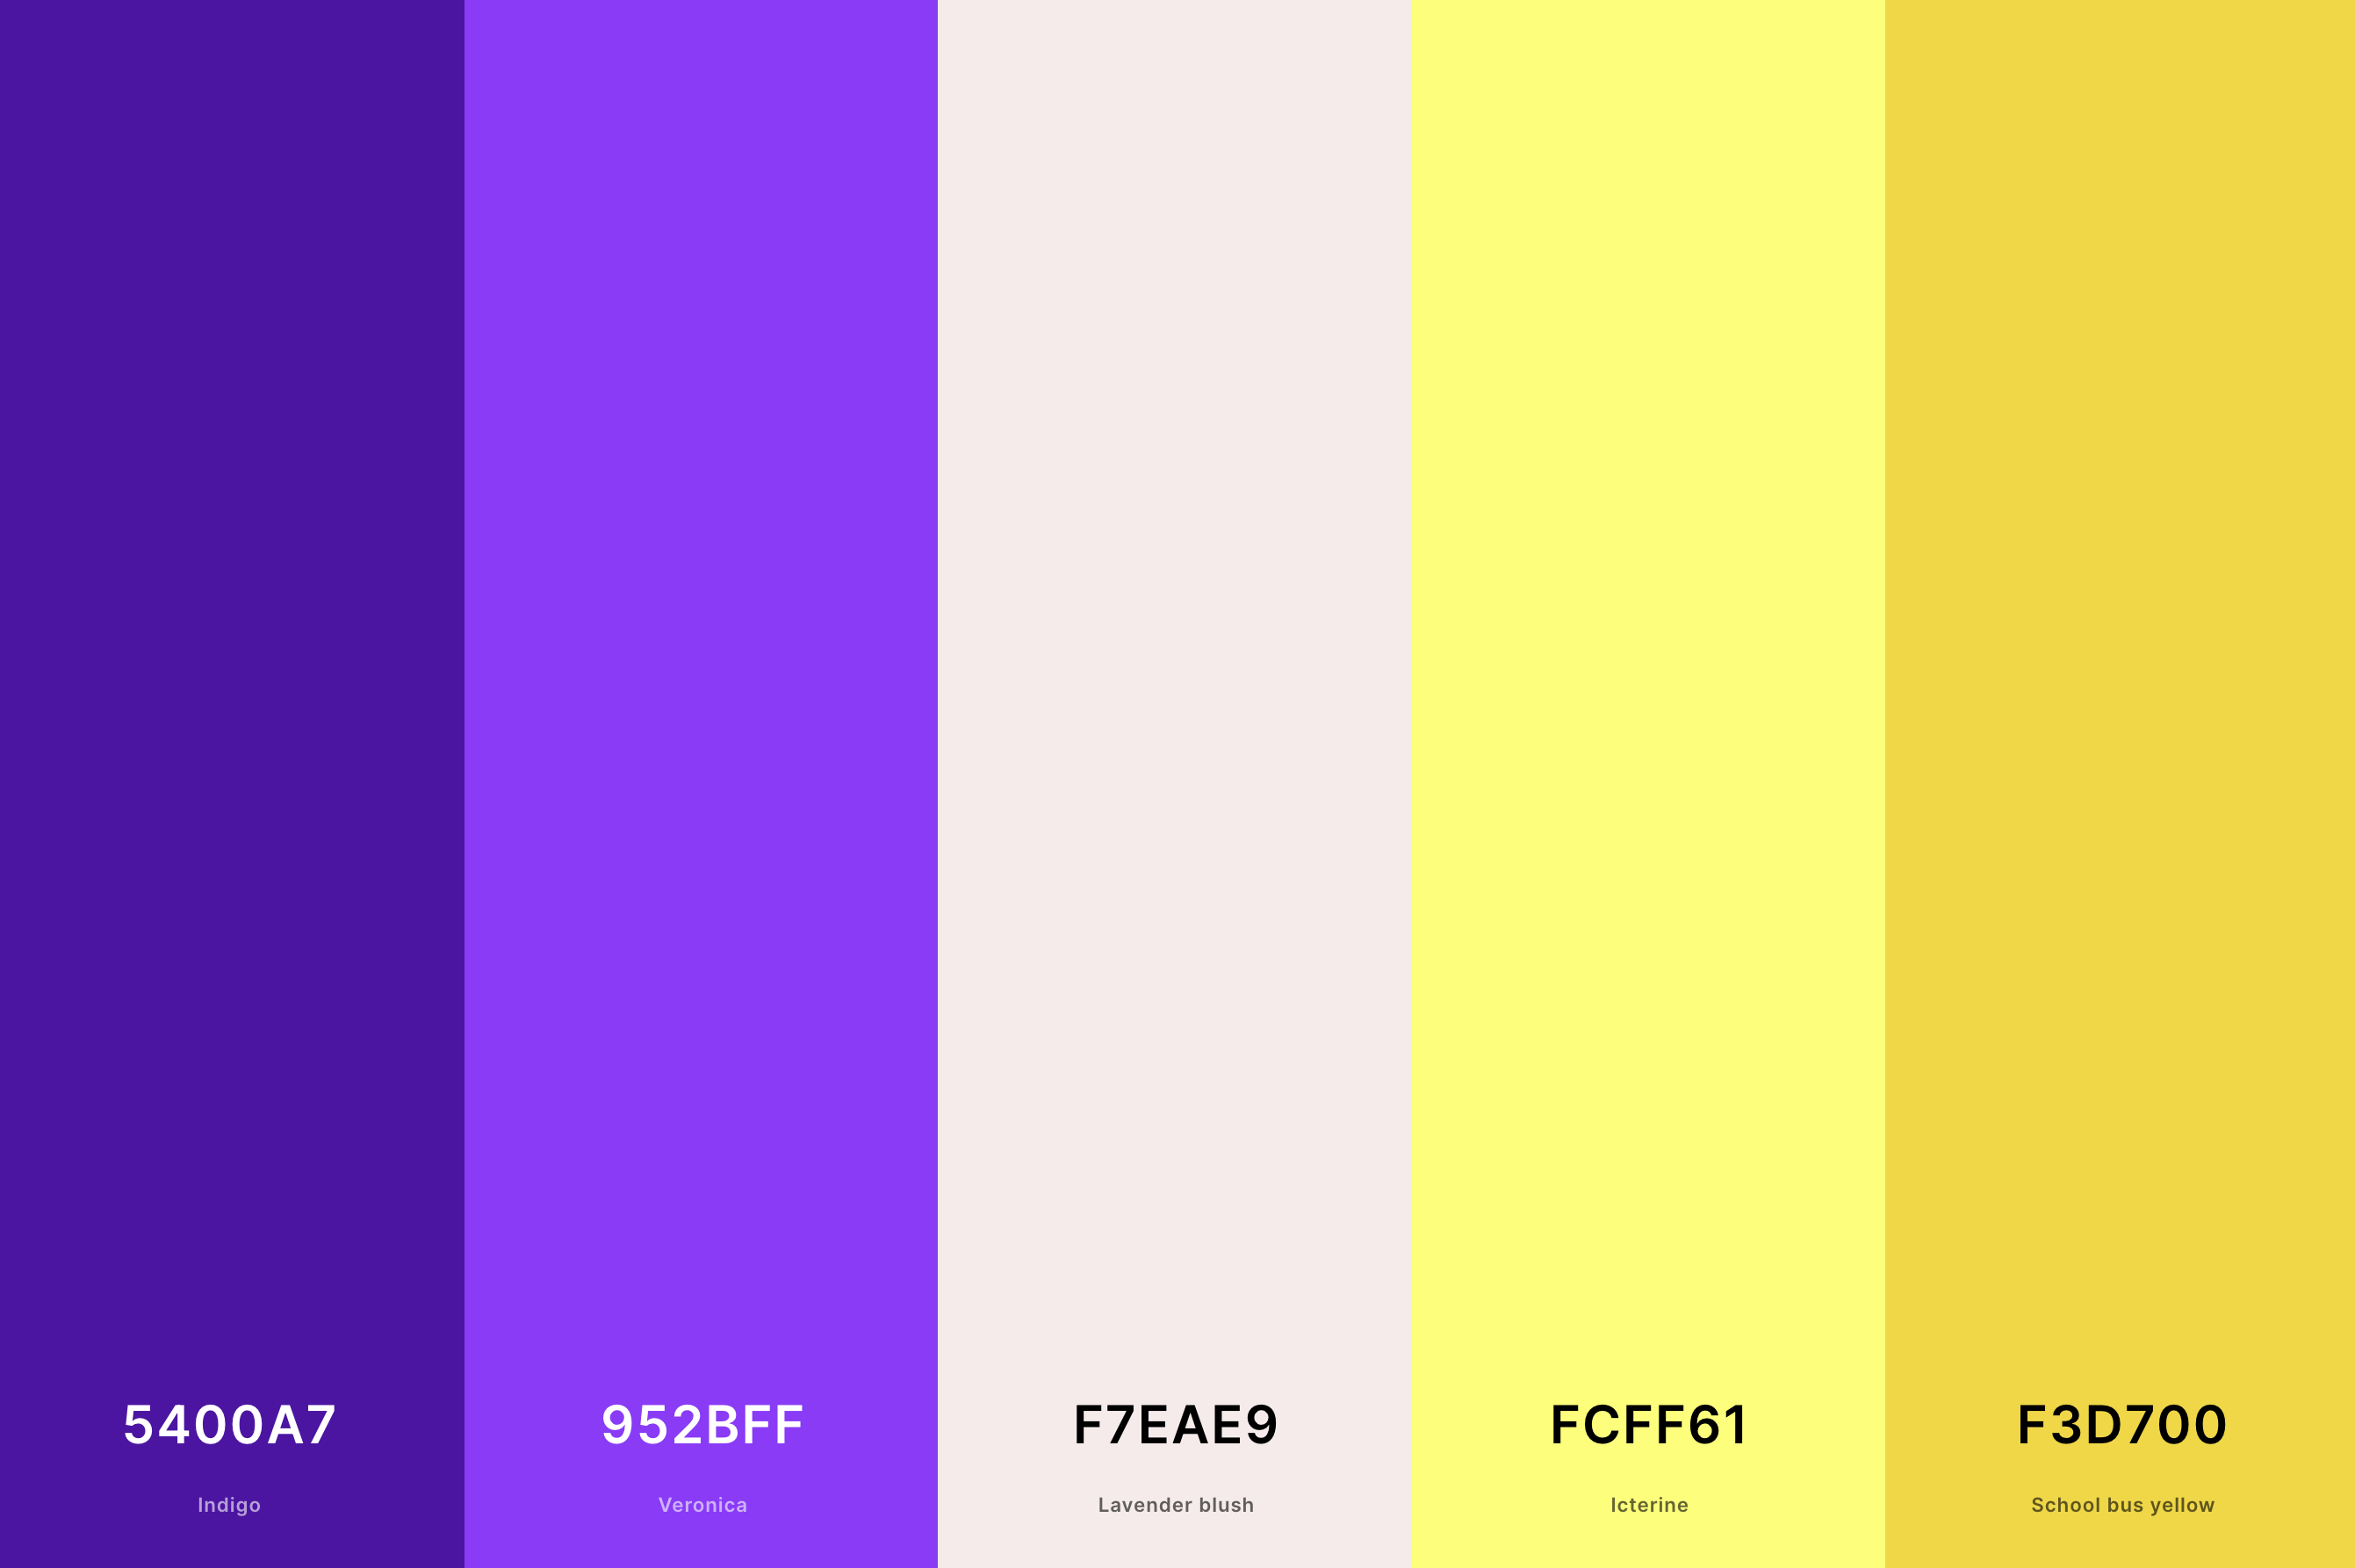 6. Violet And Yellow Color Palette Color Palette with Indigo (Hex #5400A7) + Veronica (Hex #952BFF) + Lavender Blush (Hex #F7EAE9) + Icterine (Hex #FCFF61) + School Bus Yellow (Hex #F3D700) Color Palette with Hex Codes